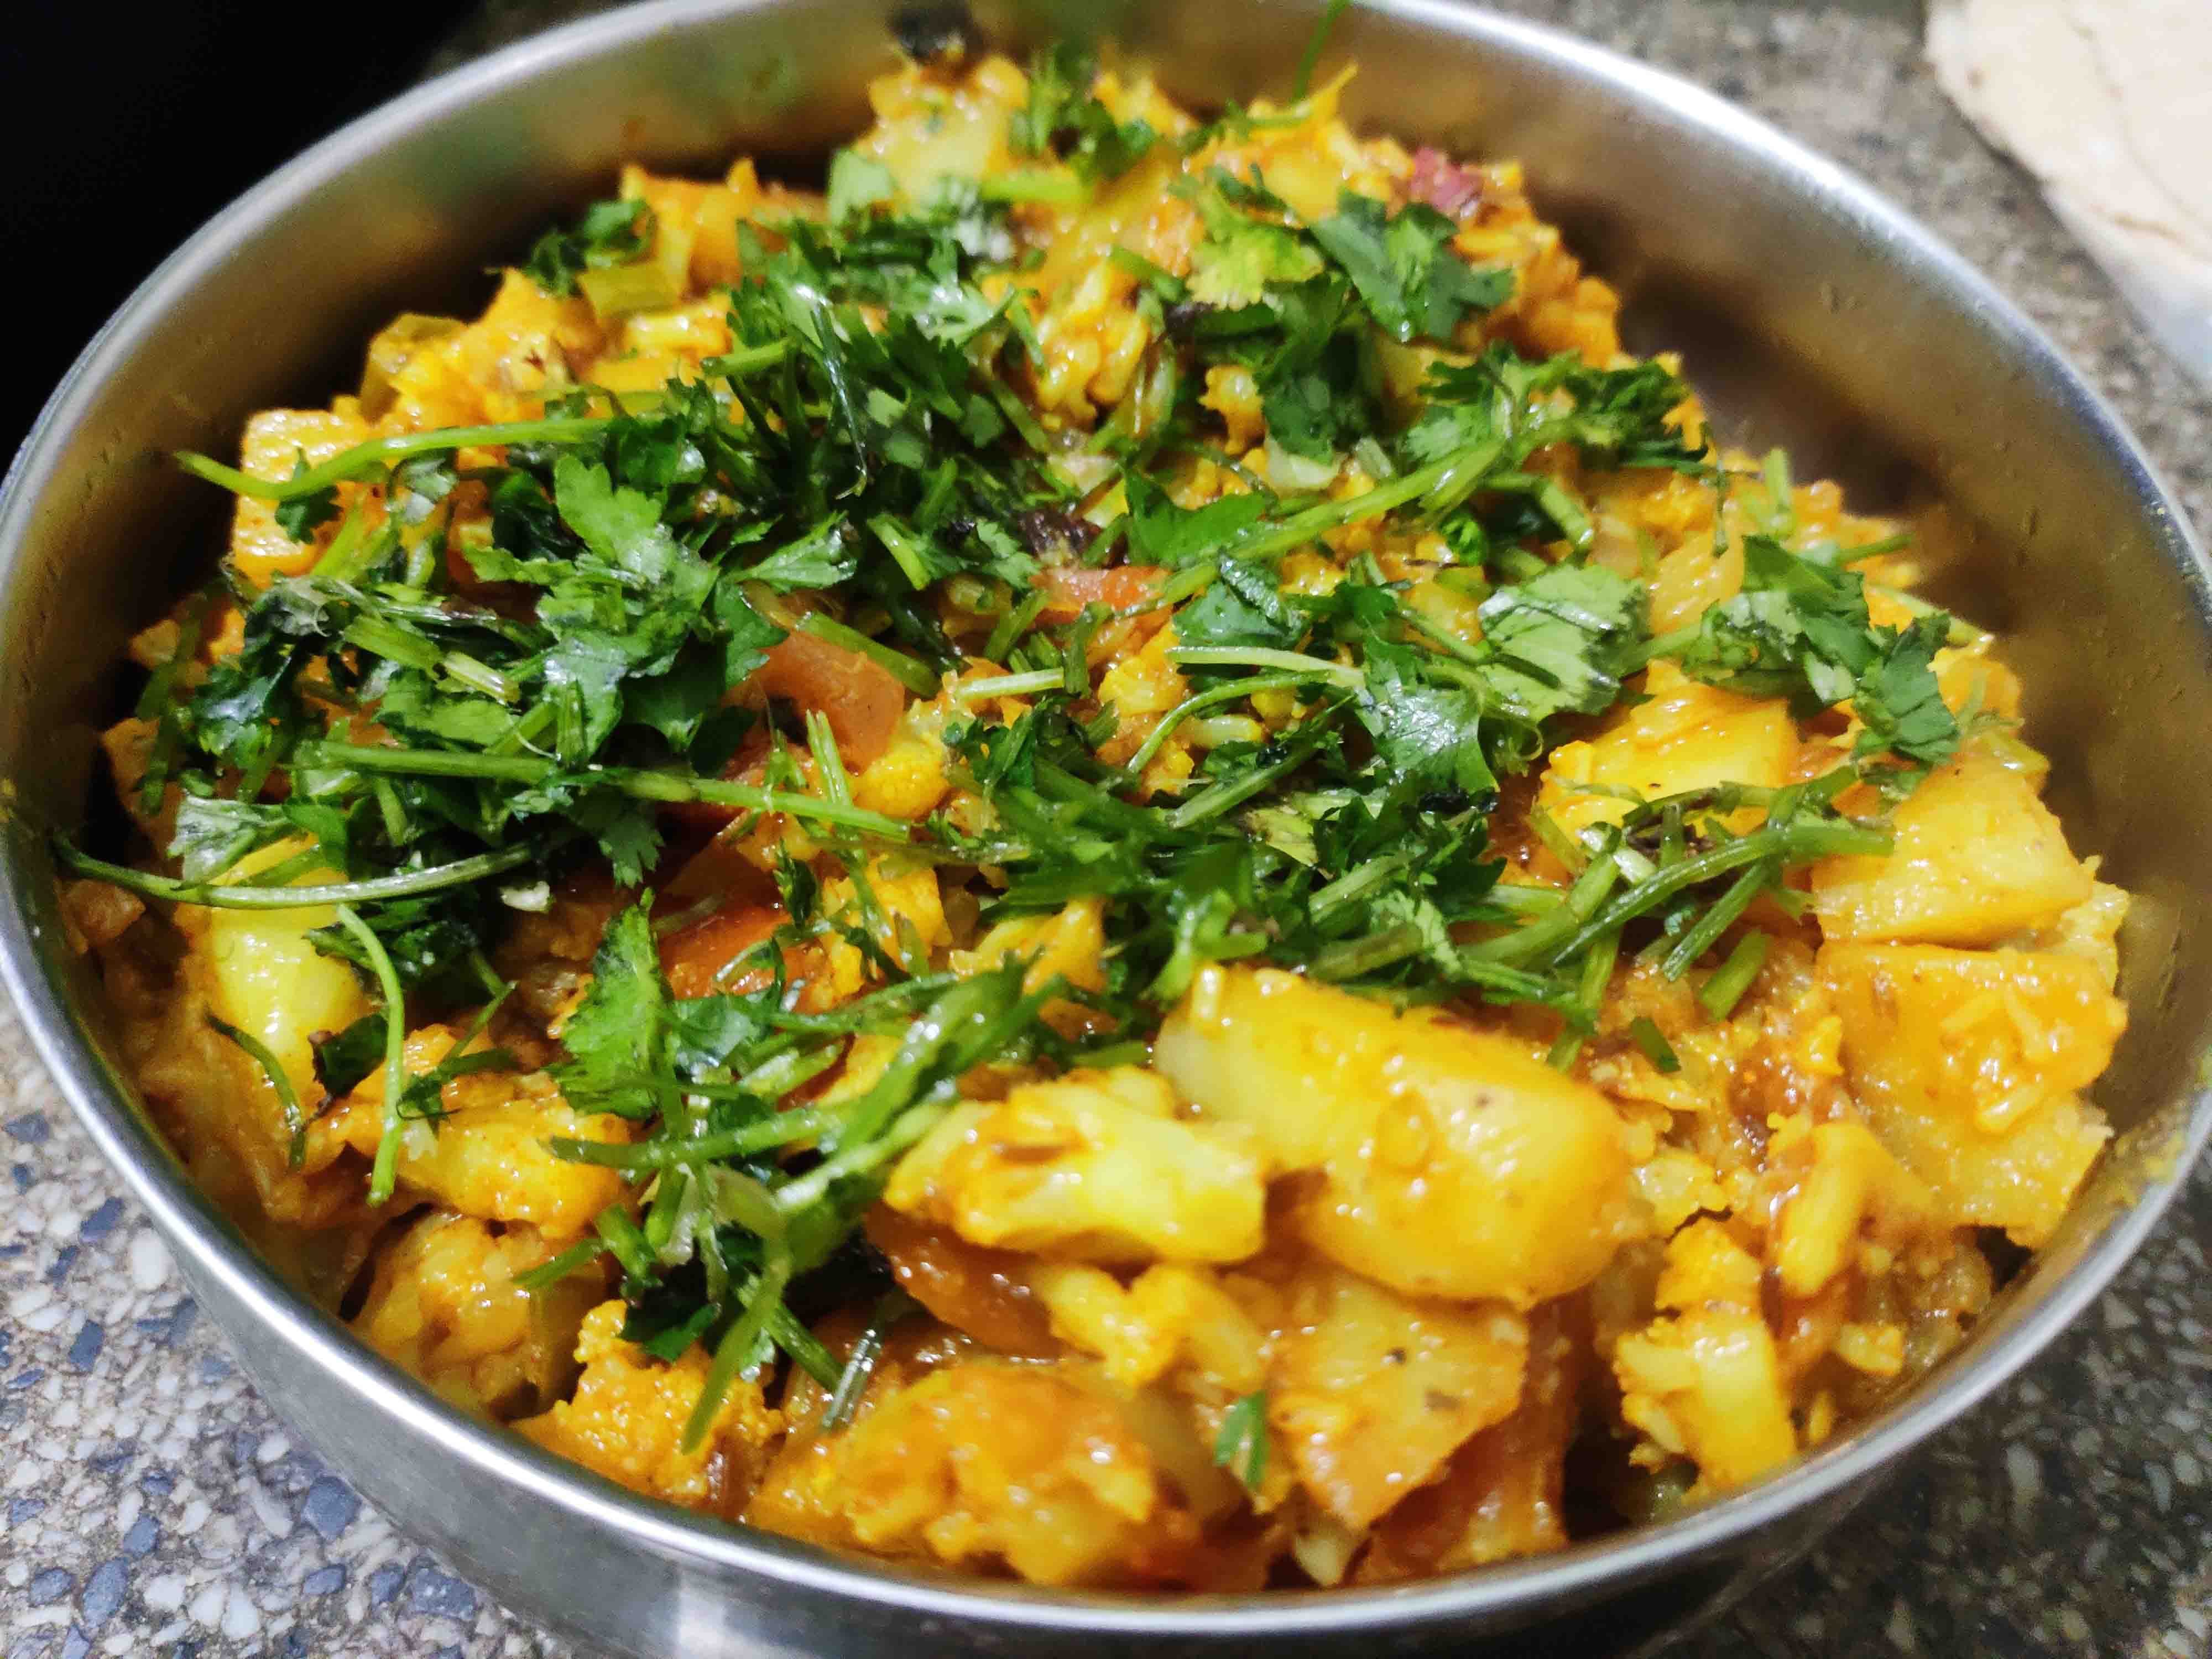 Potato and cauliflower tempered with cumin seeds stir-fried with onion and tomato sauce